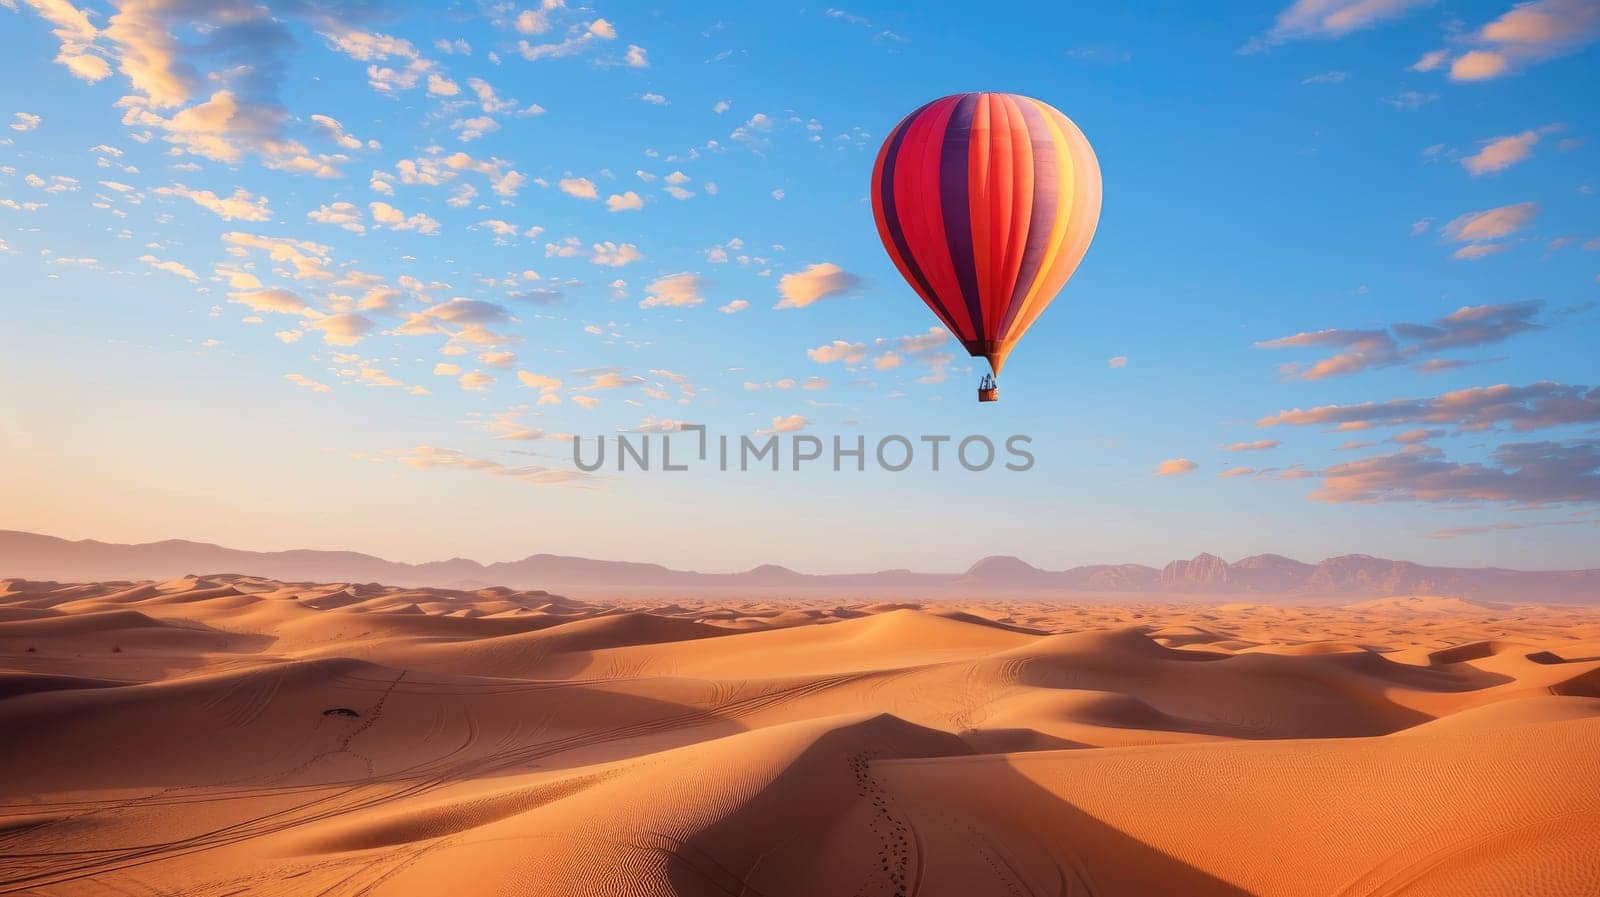 Hot air balloon floating over desert in sahara with copy space area. by Chawagen